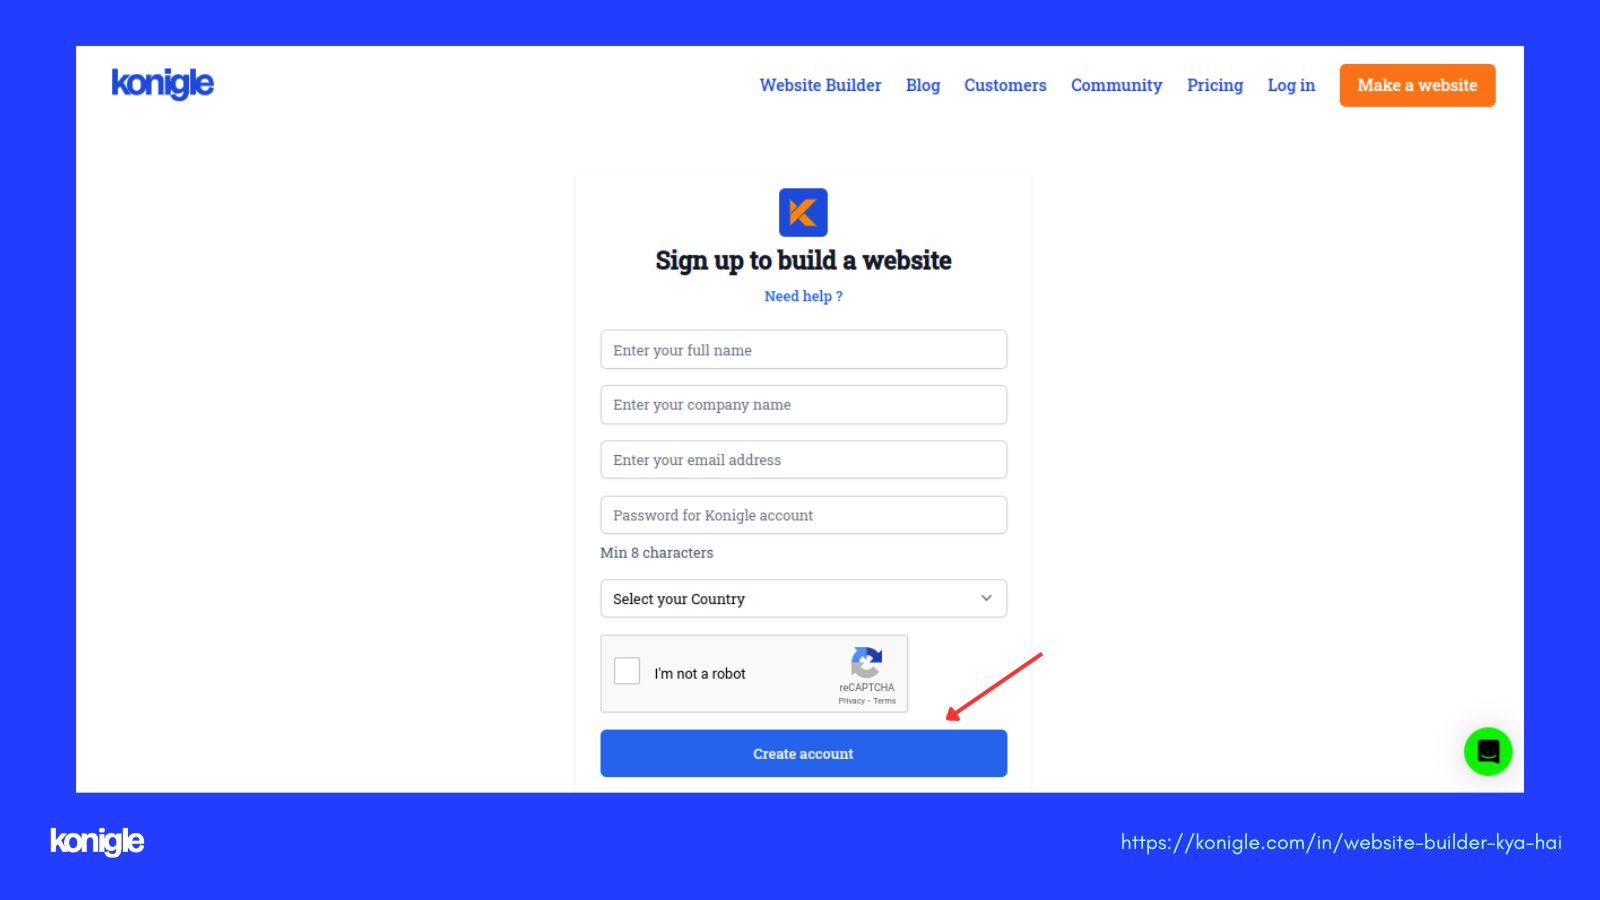 Sign up to build a website "Create account" button